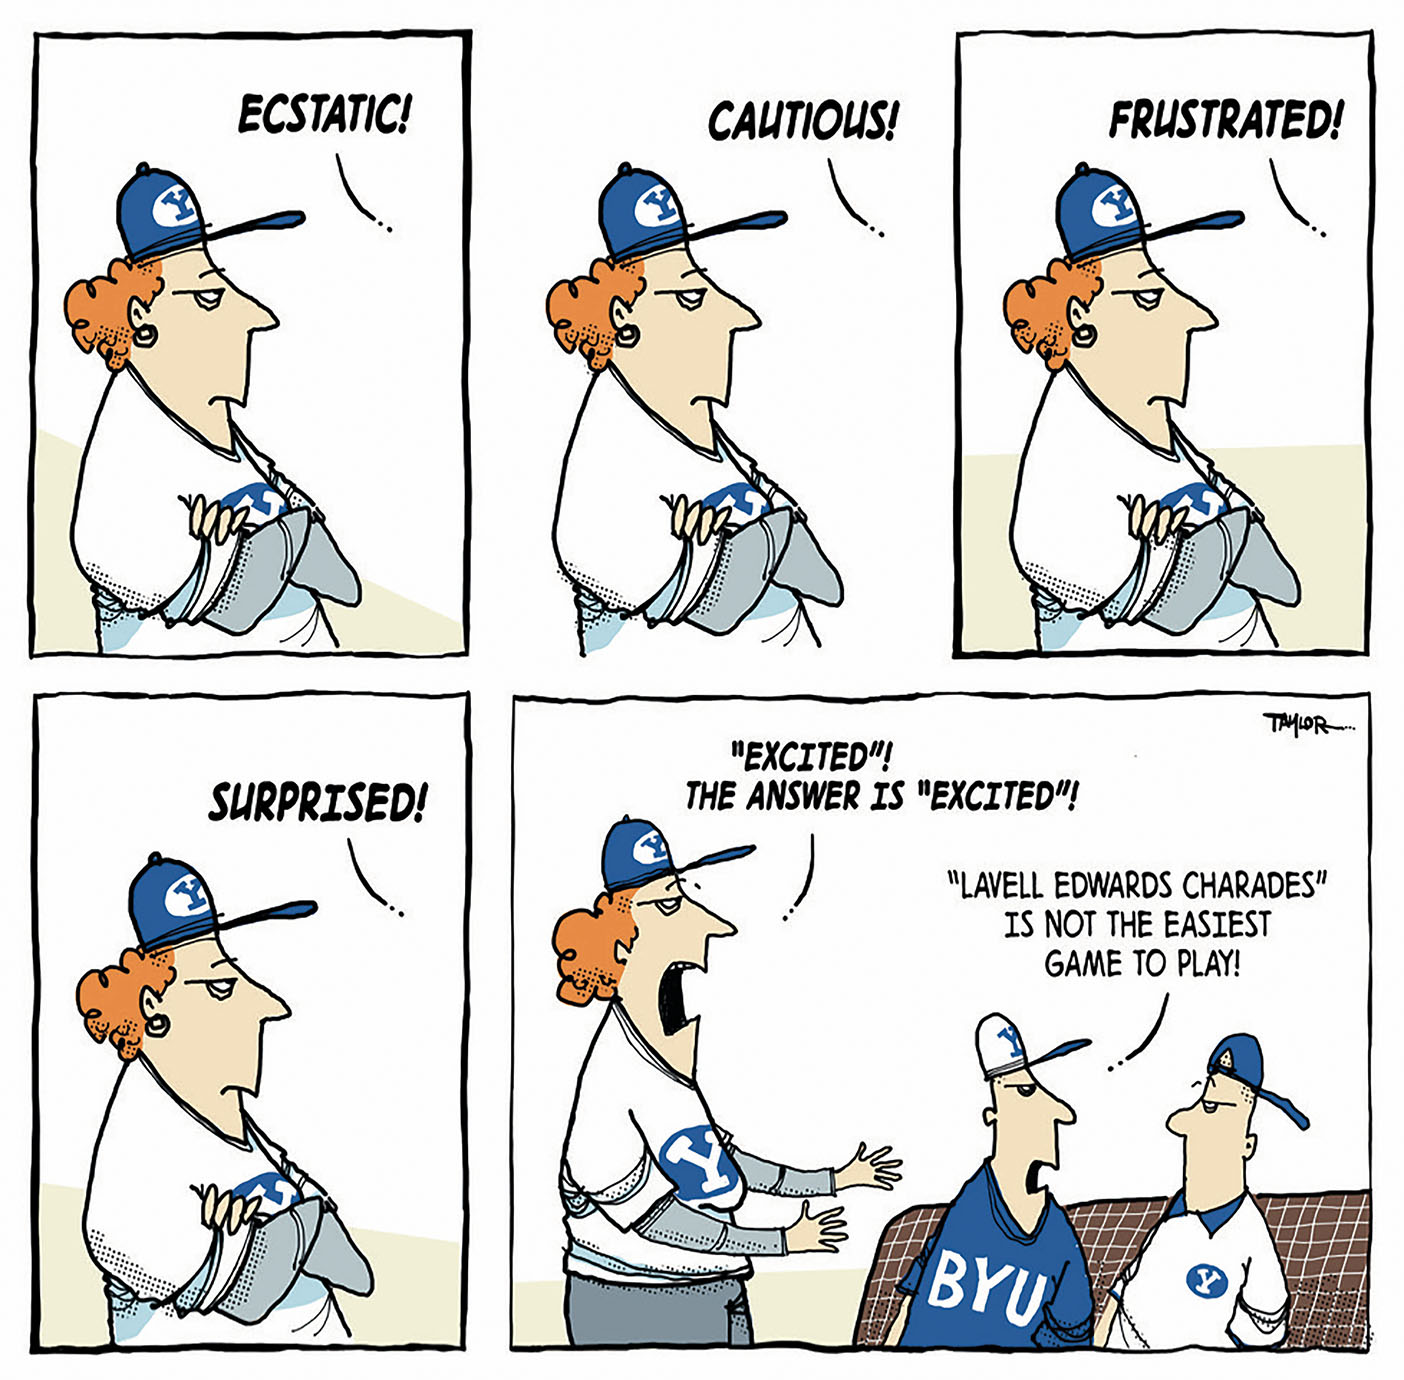 A comic strip showing the many emotions of LaVell Edwards—one stoic face conveys them all